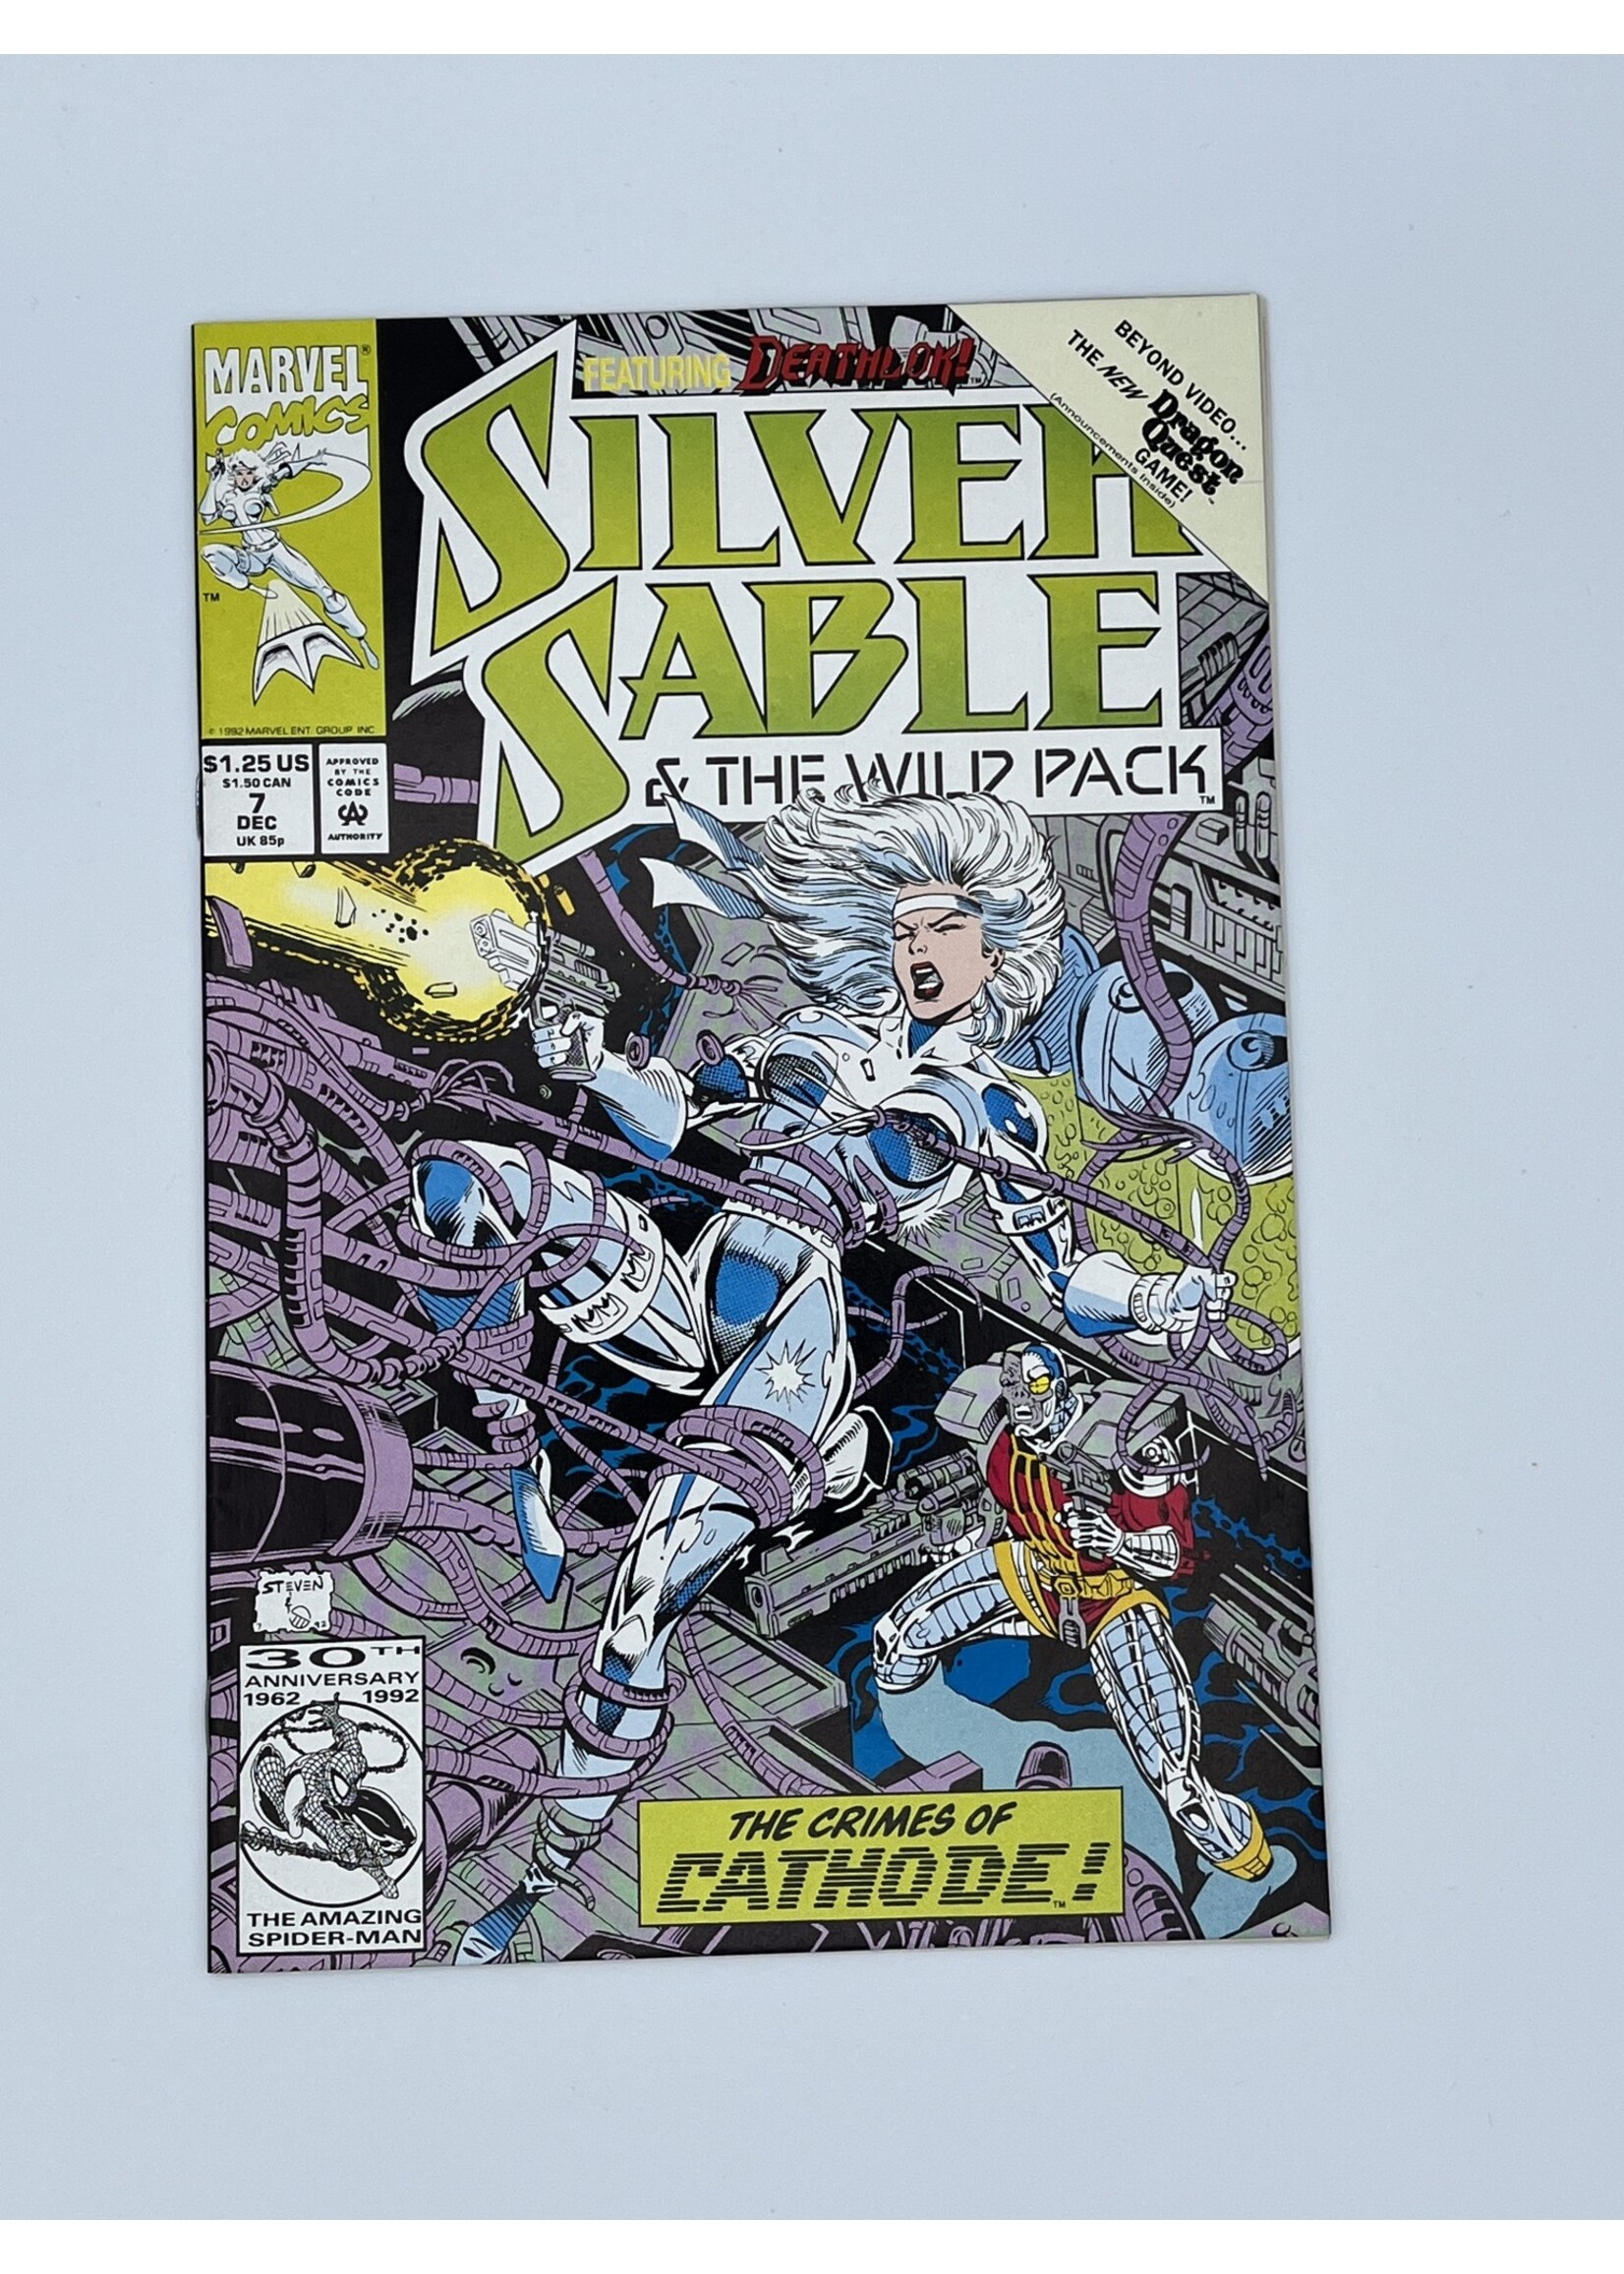 Marvel SILVER SABLE And THE WILD PACK #7 Marvel December 1992